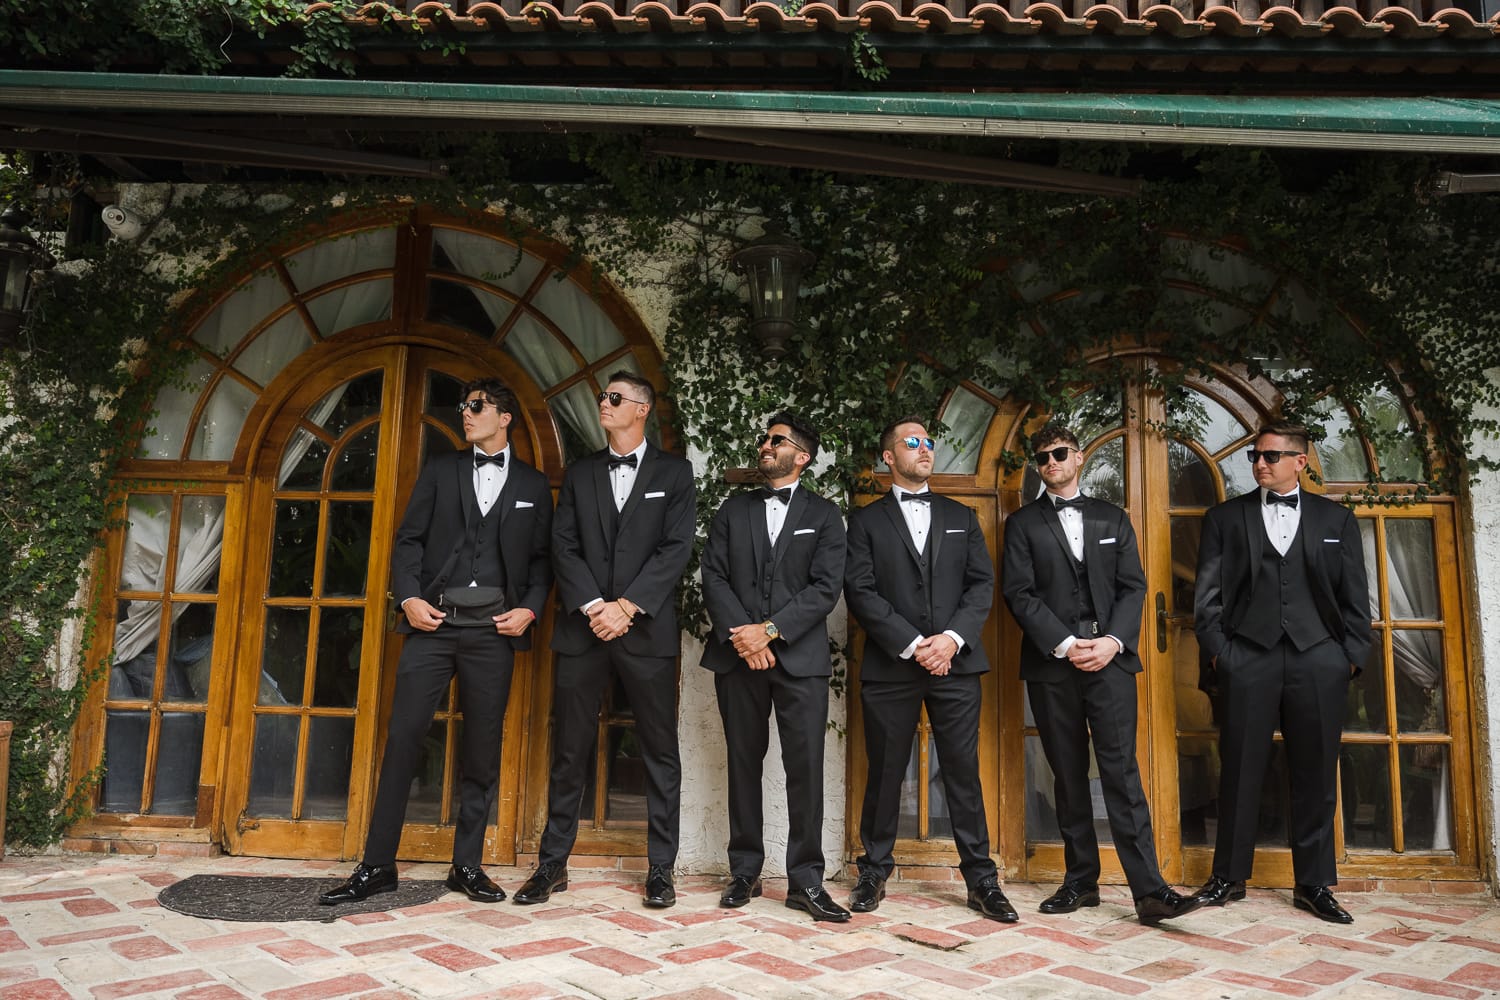 Relive the beauty of a wildflower wedding at Hacienda Siesta Alegre. We captured a high school sweetheart love story through vivid florals and customized decor.